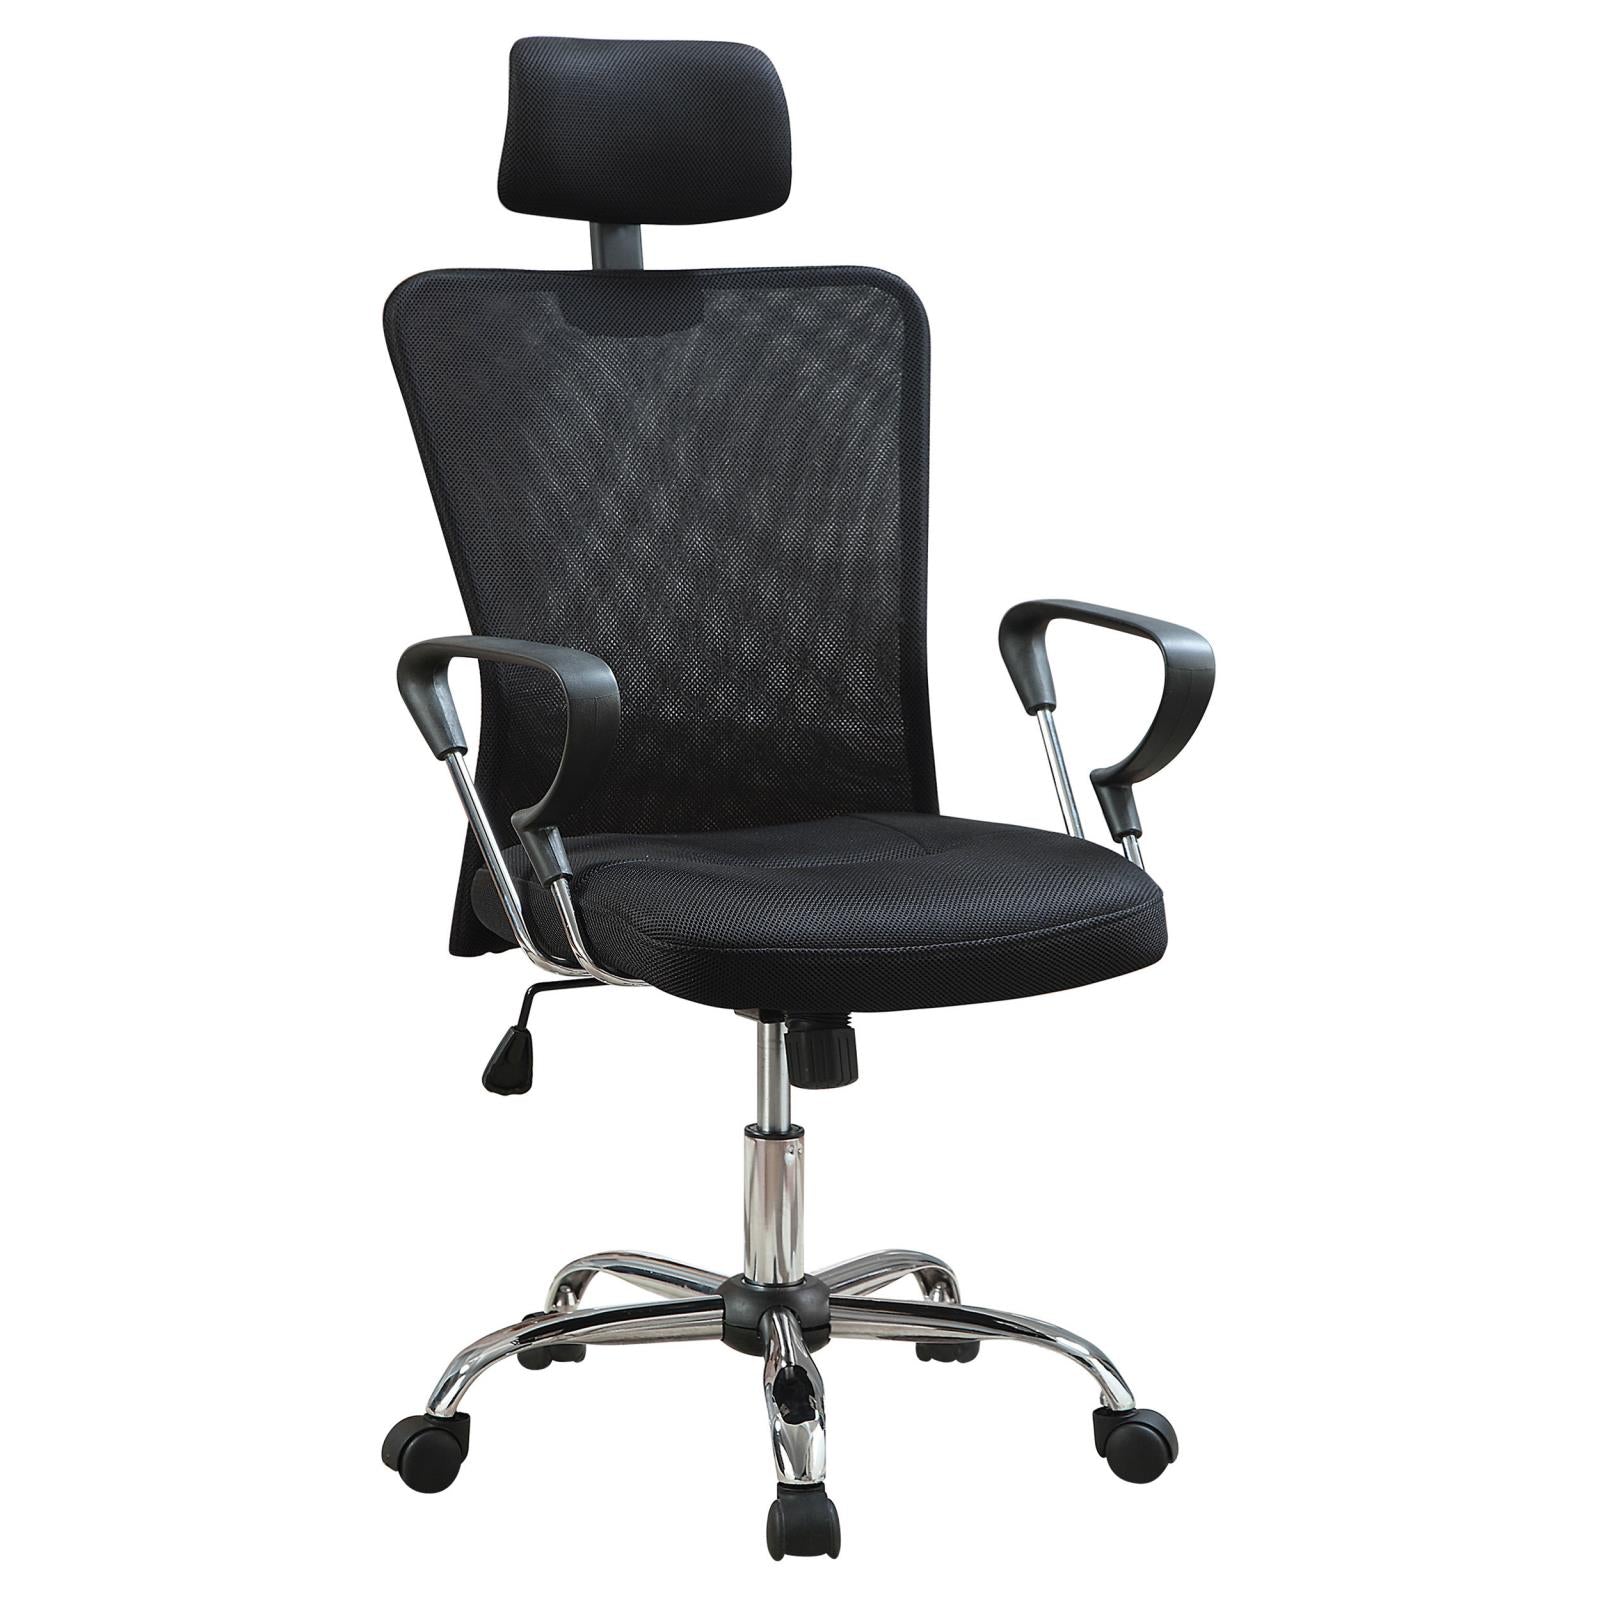 G800206 Casual Black Office Chair with Headrest image